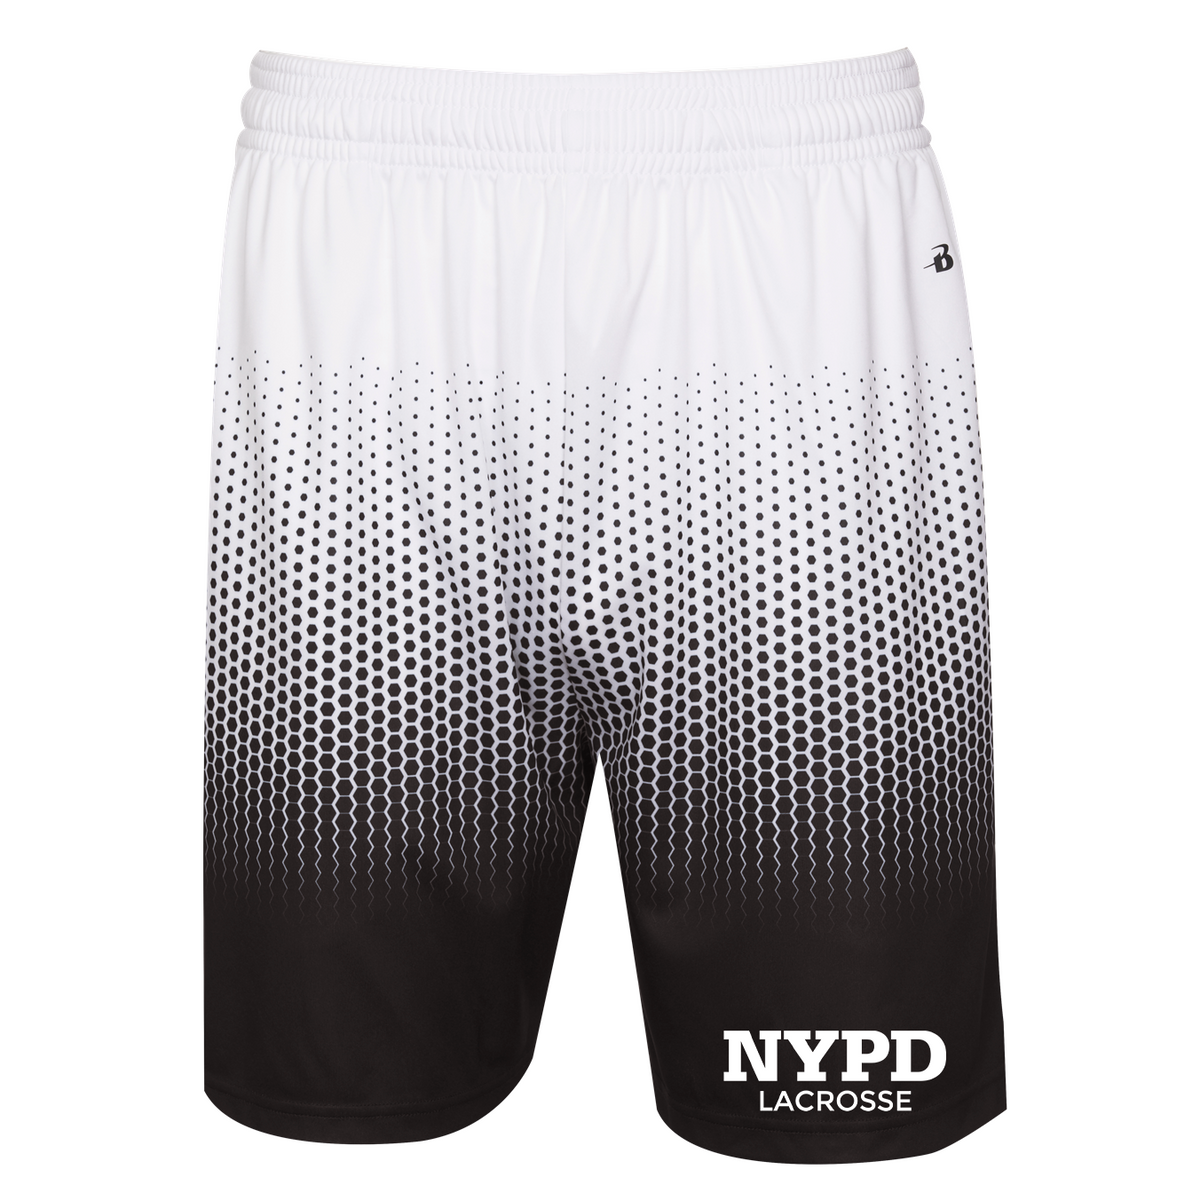 NYPD Lacrosse Hex 2.0 Shorts